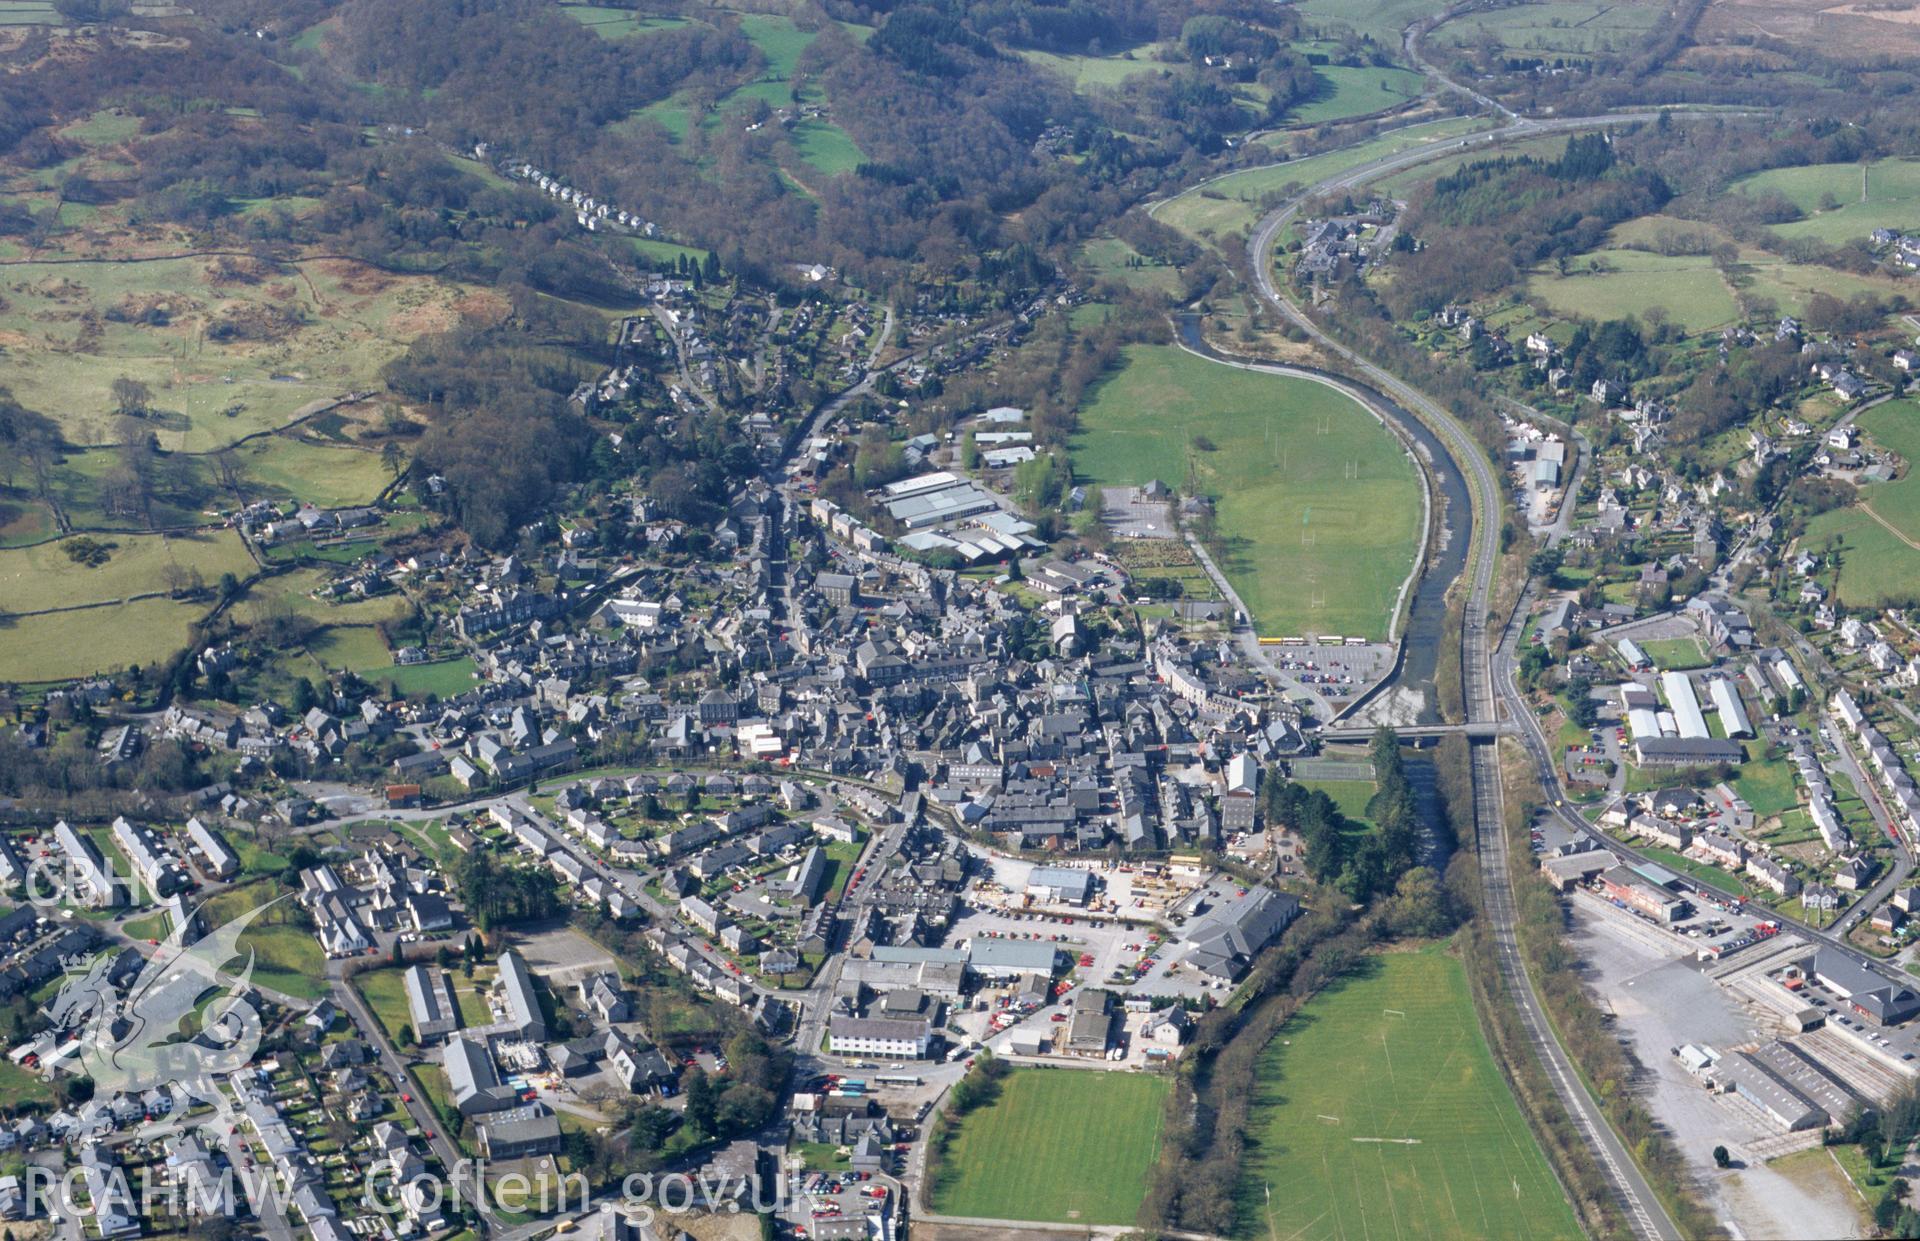 RCAHMW colour oblique aerial photograph of Dolgellau, townscape. Taken by Toby Driver on 31/03/2003